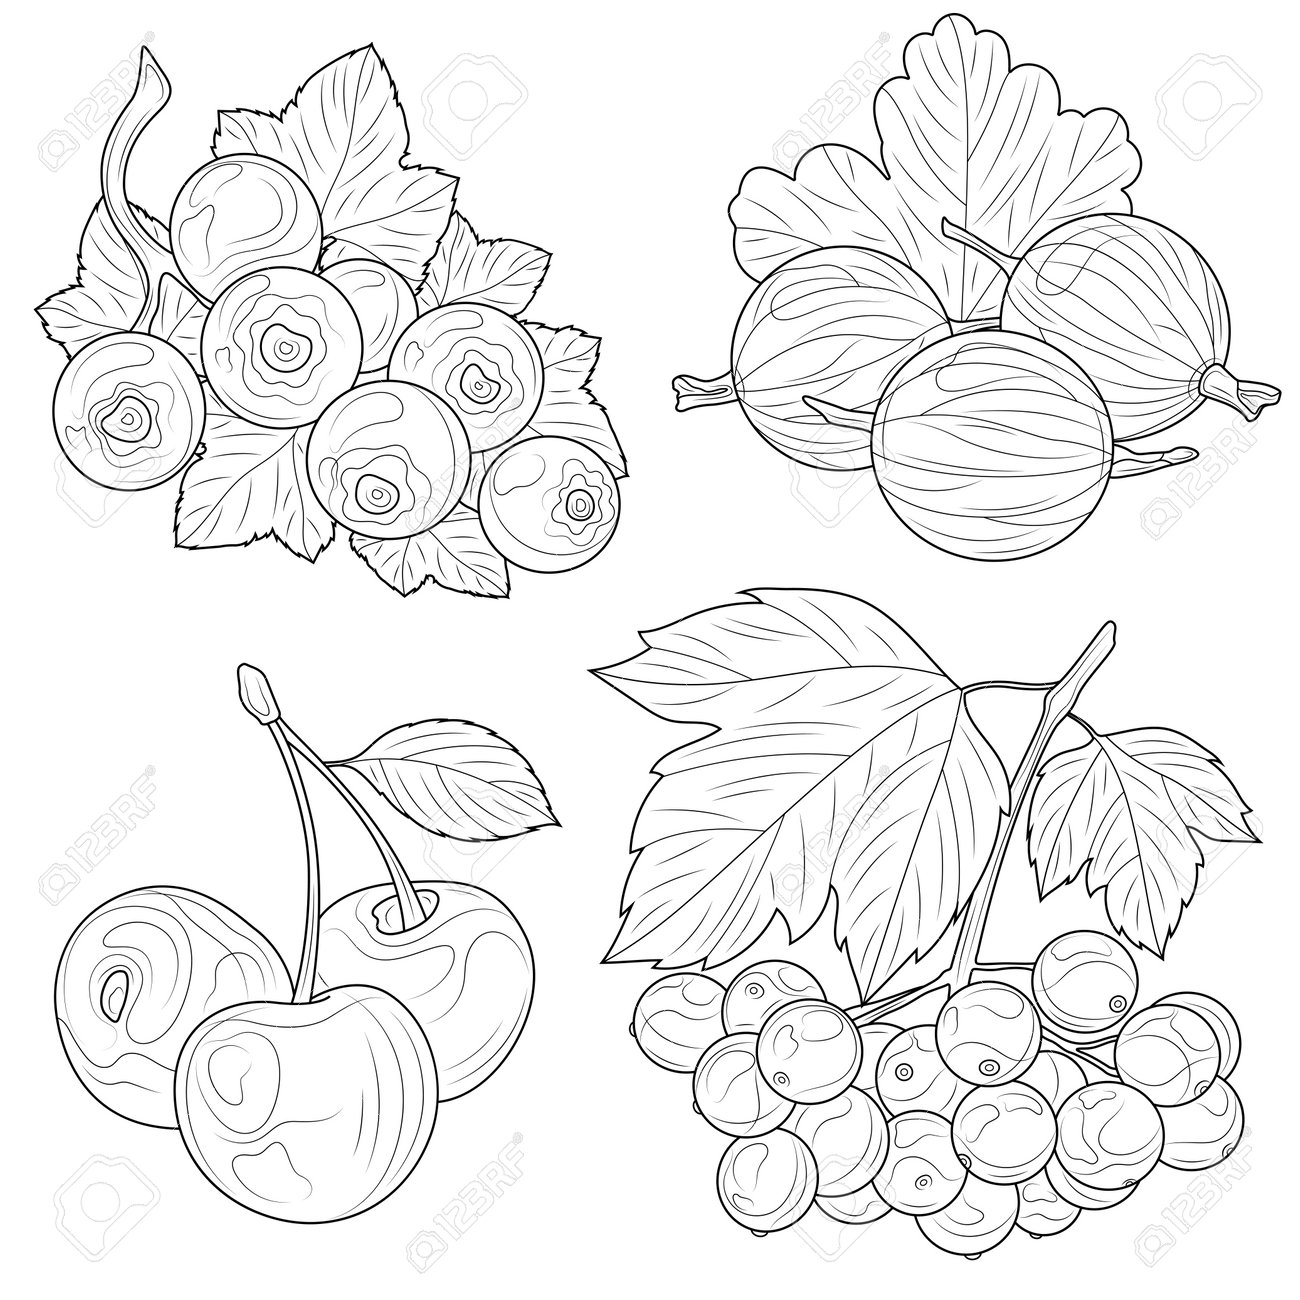 Berries viburnum gooseberry cherry and currantcoloring book antistress for children and adultszen